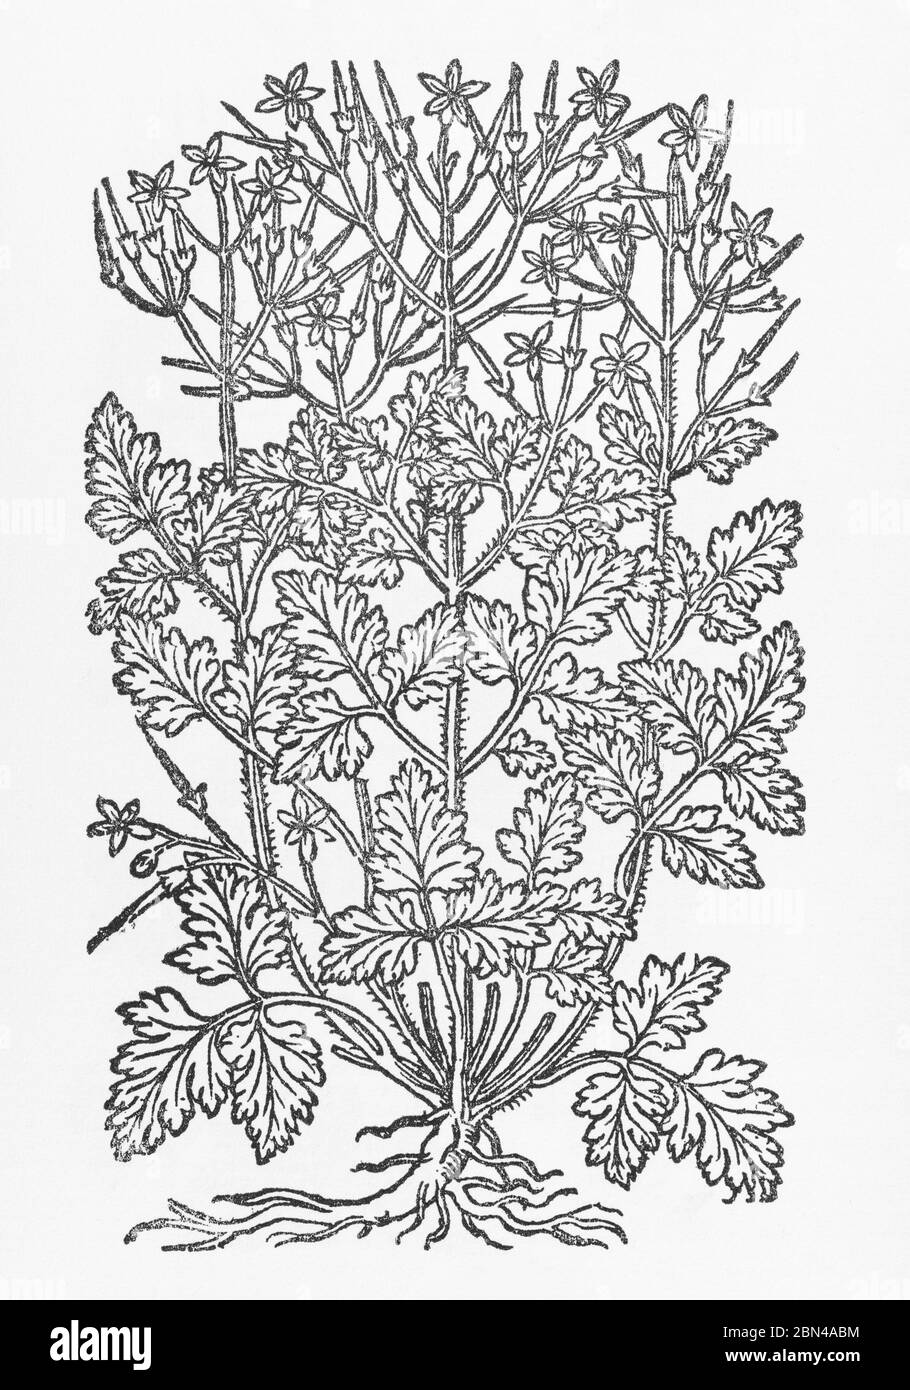 Herb Robert / Geranium robertianum plant woodcut from Gerarde's Herball, History of Plants. Is a well-known medicinal plant for remedies. P794. Stock Photo